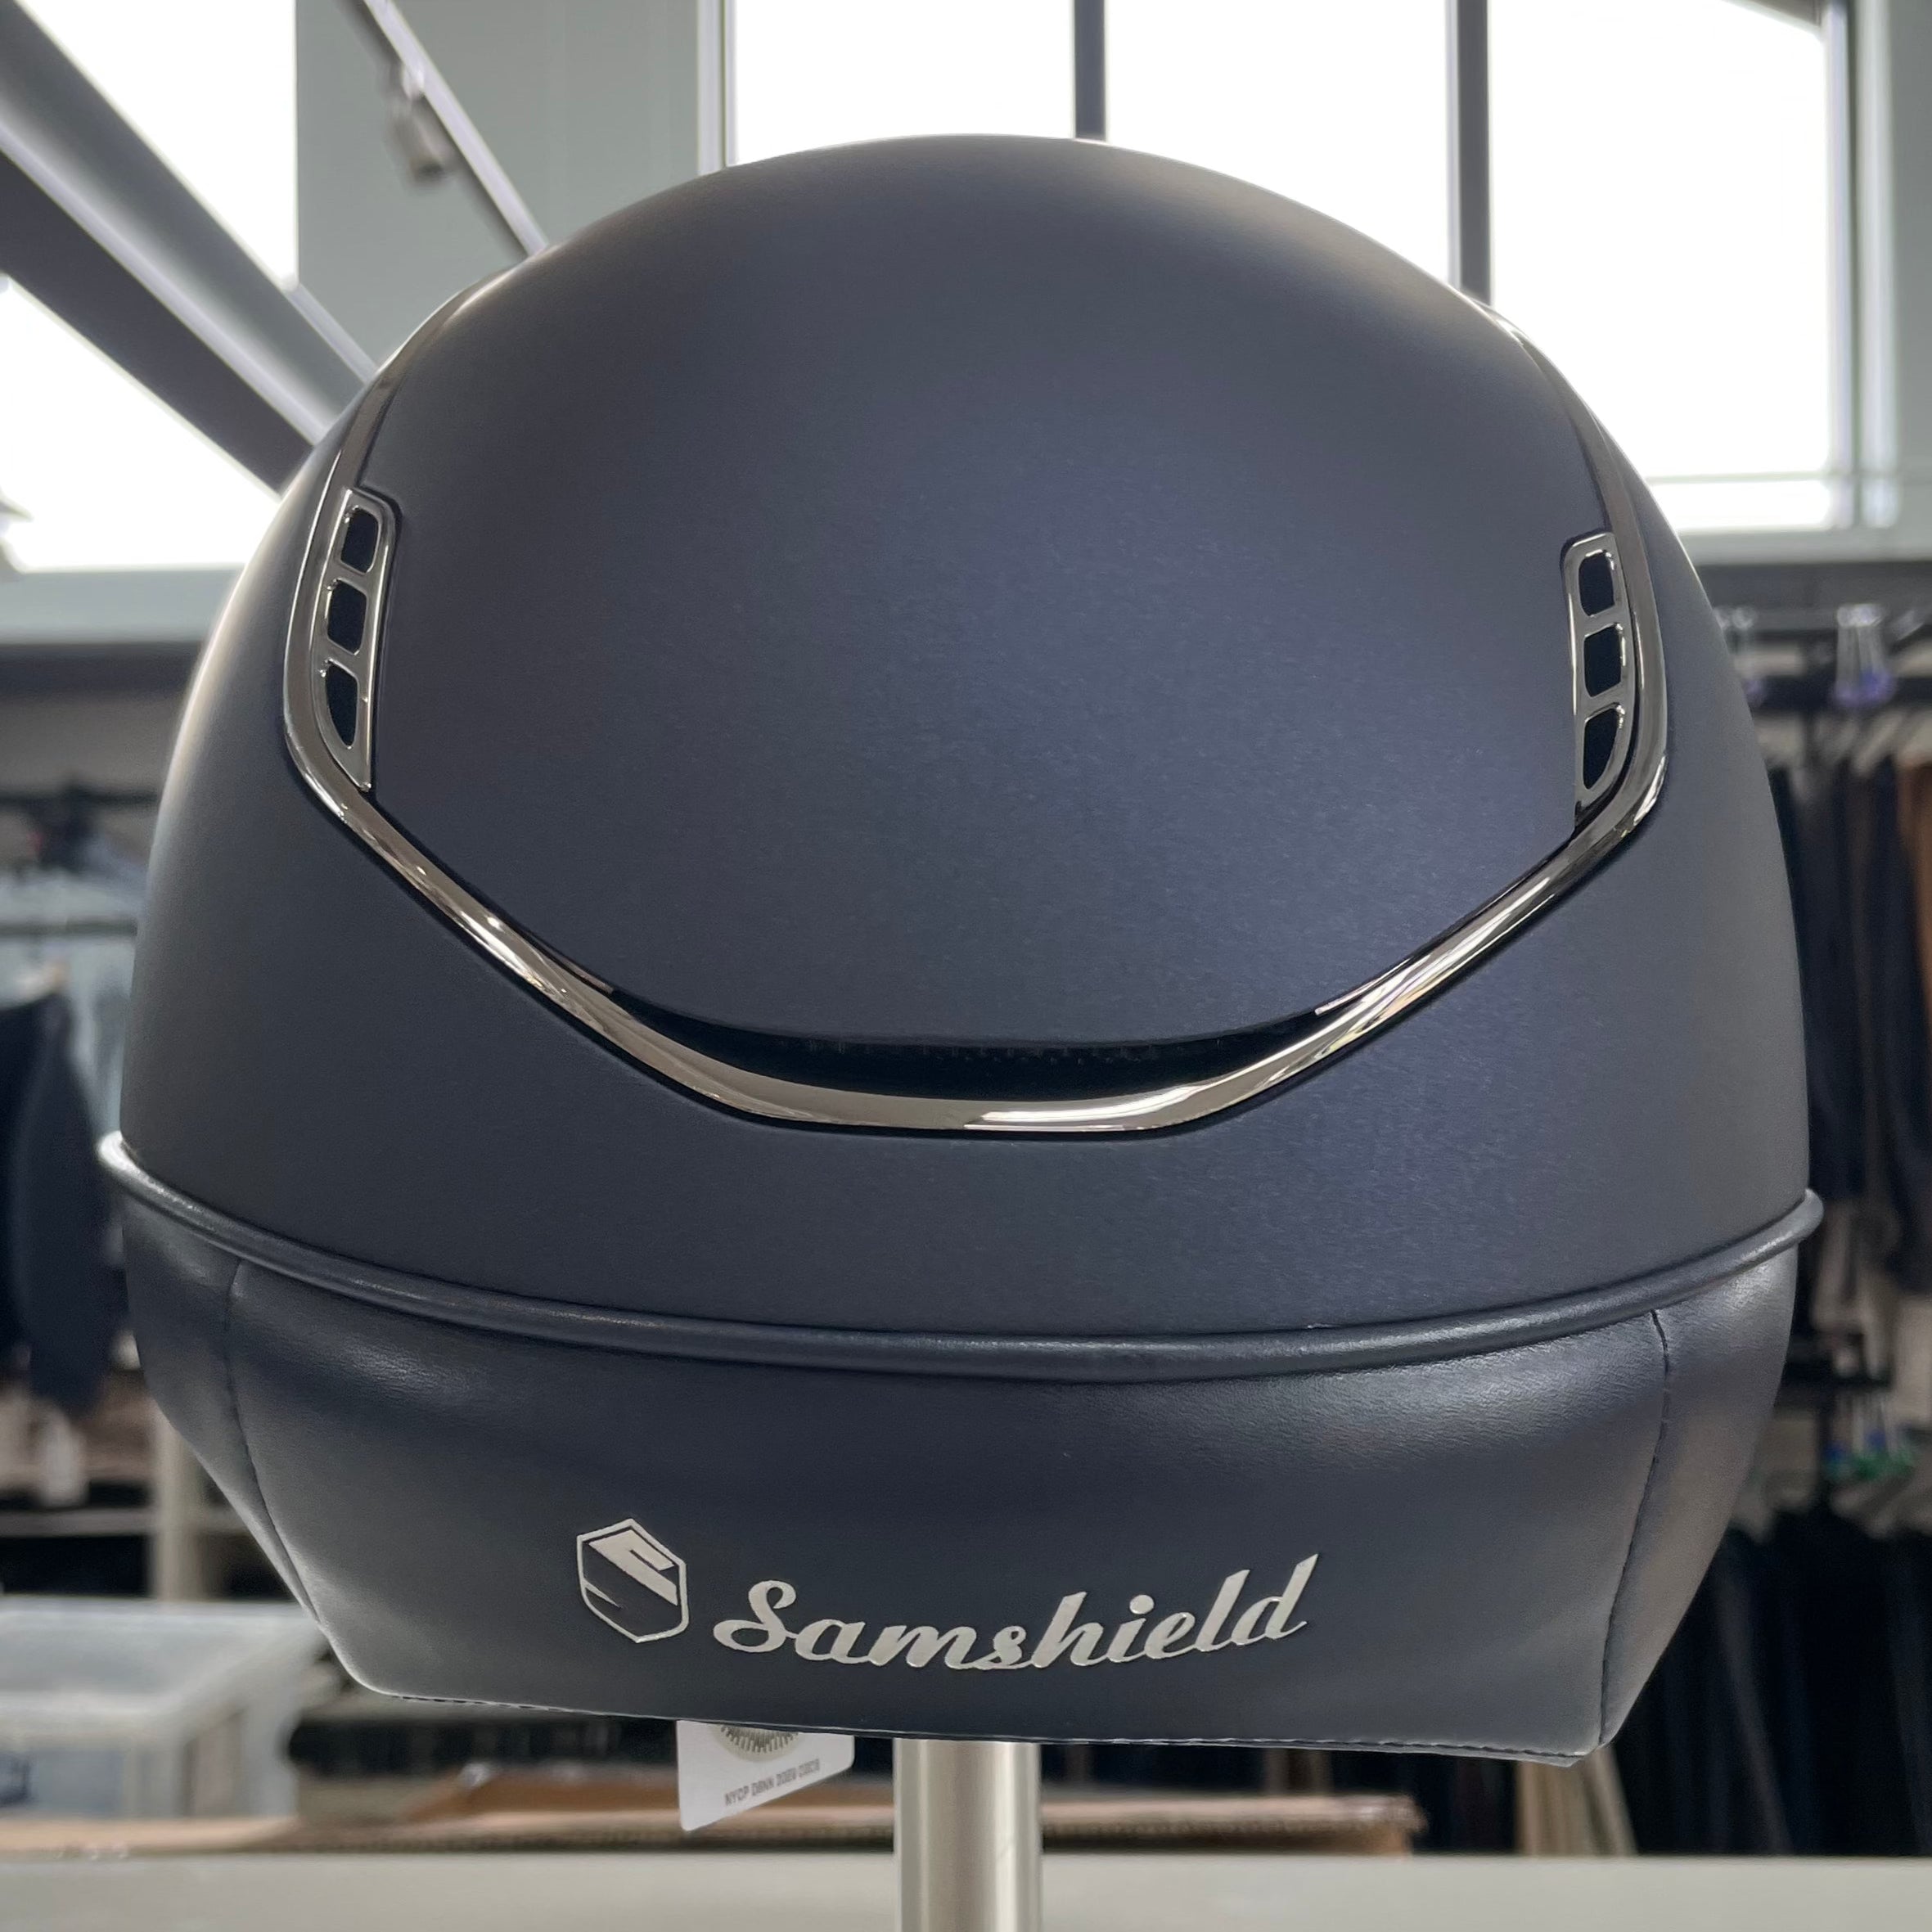 Samshield MissShield 2.0 Blue with ocean depth badge and frontal band M- in stock and ready to ship!